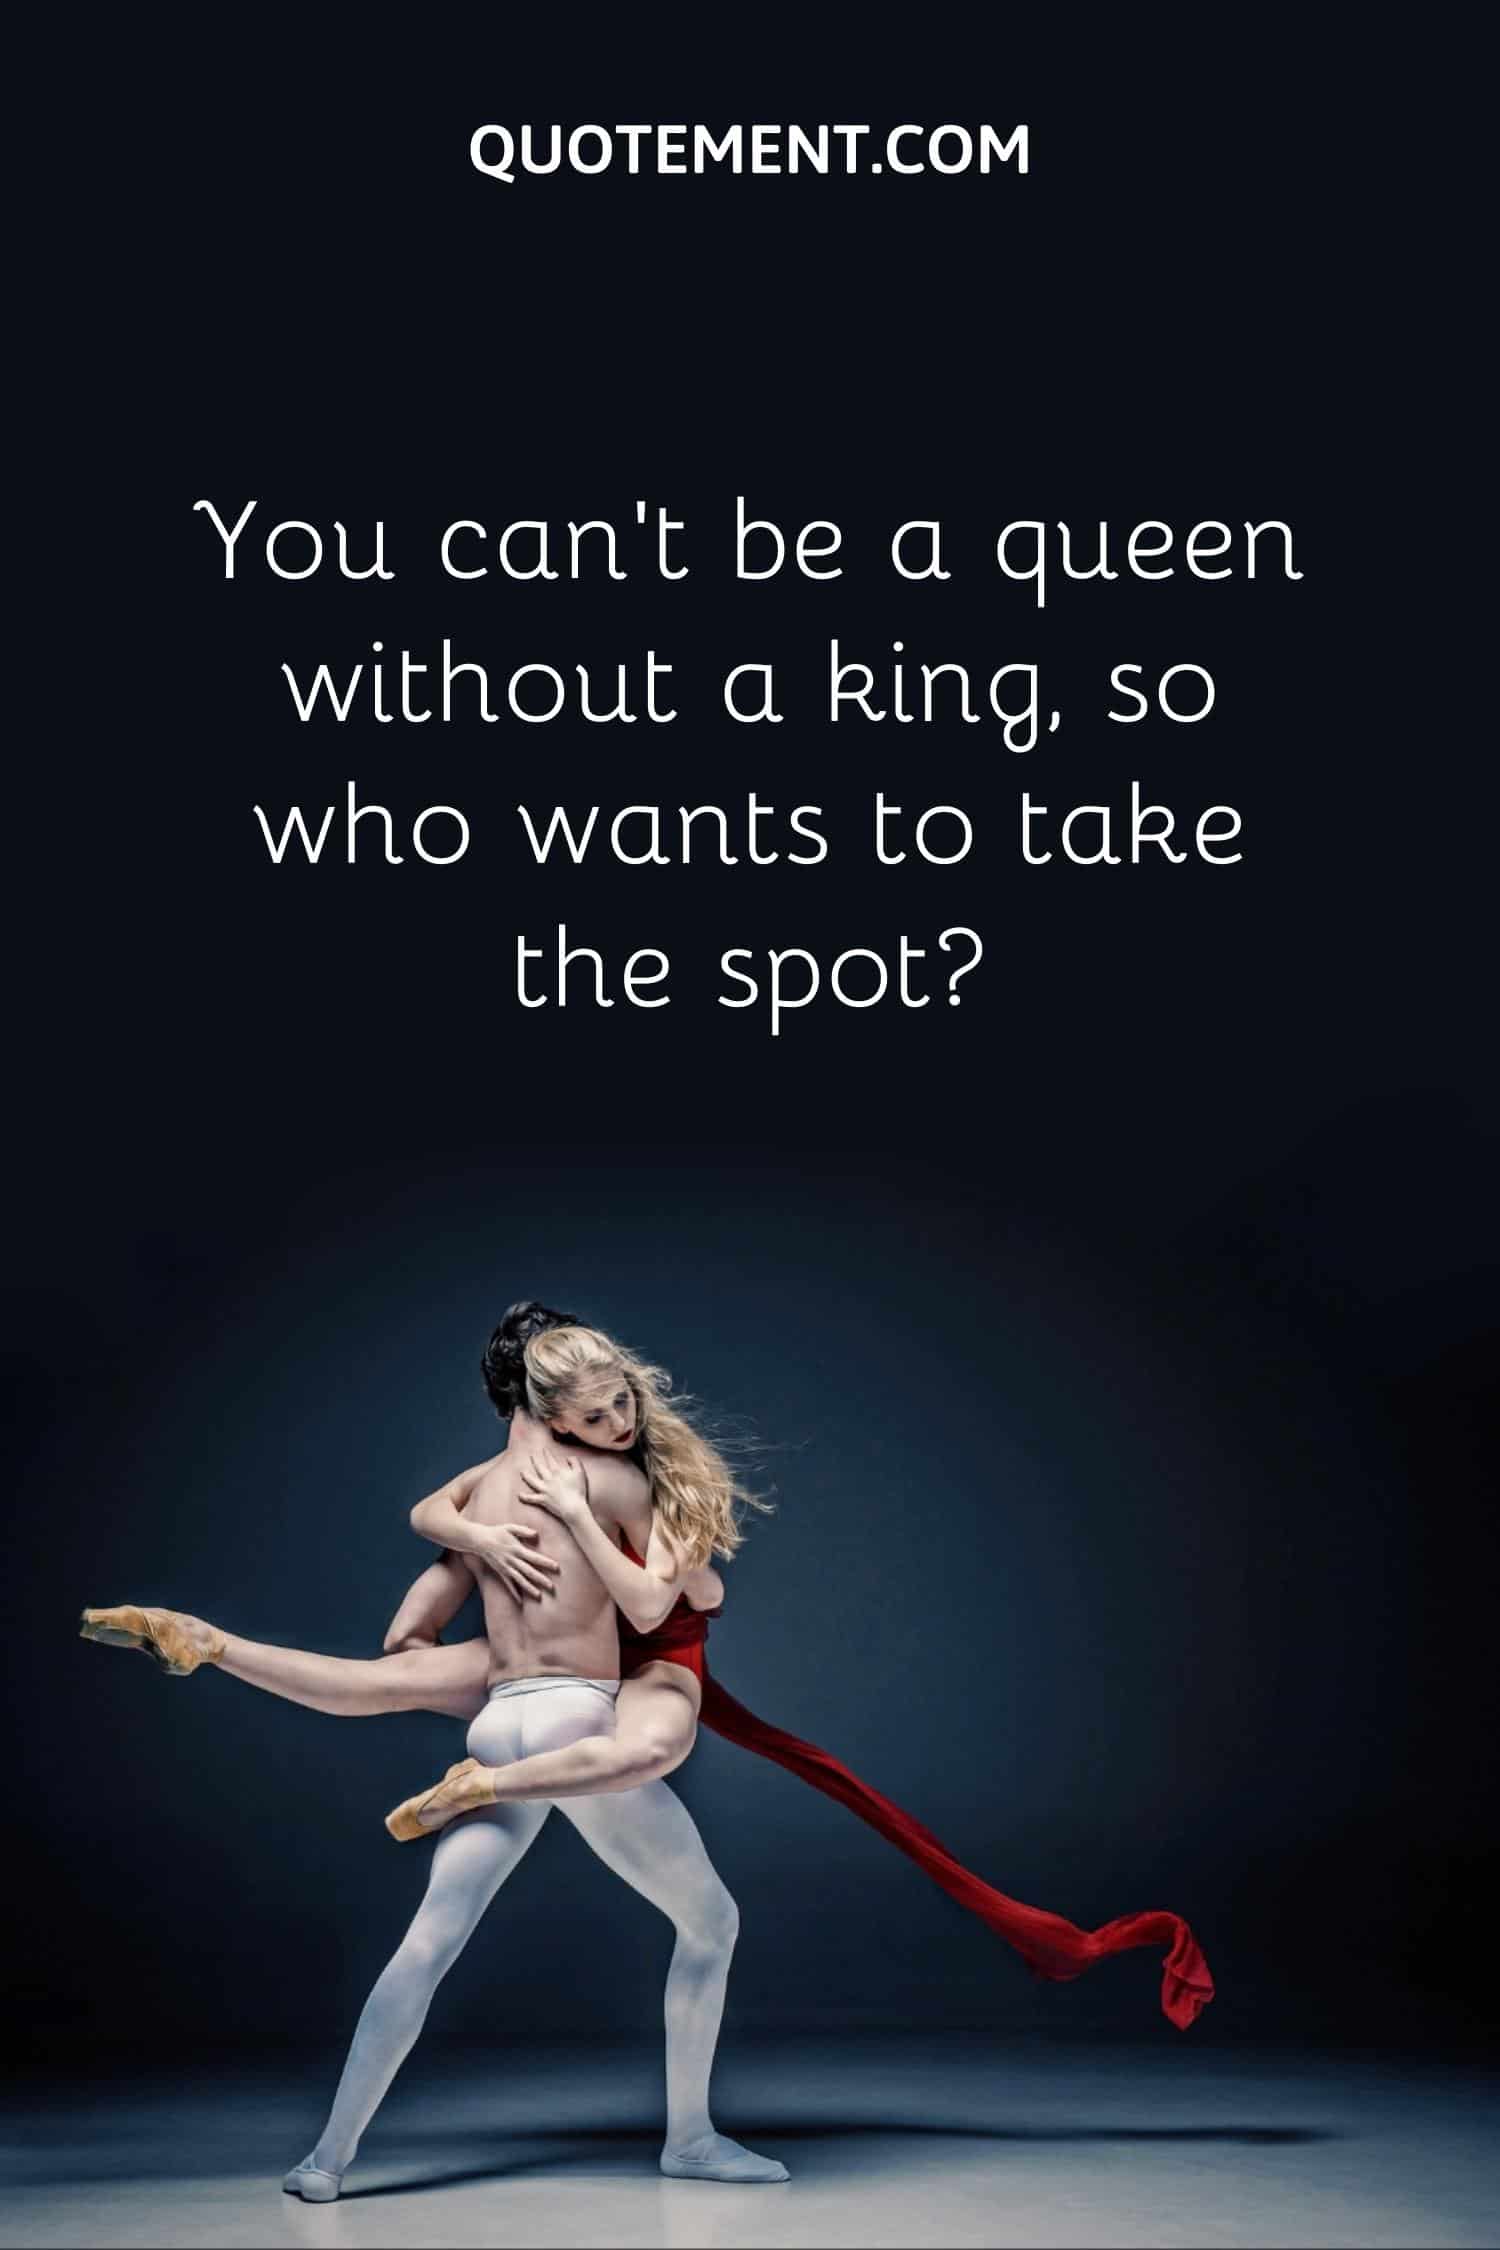 You can’t be a queen without a king, so who wants to take the spot